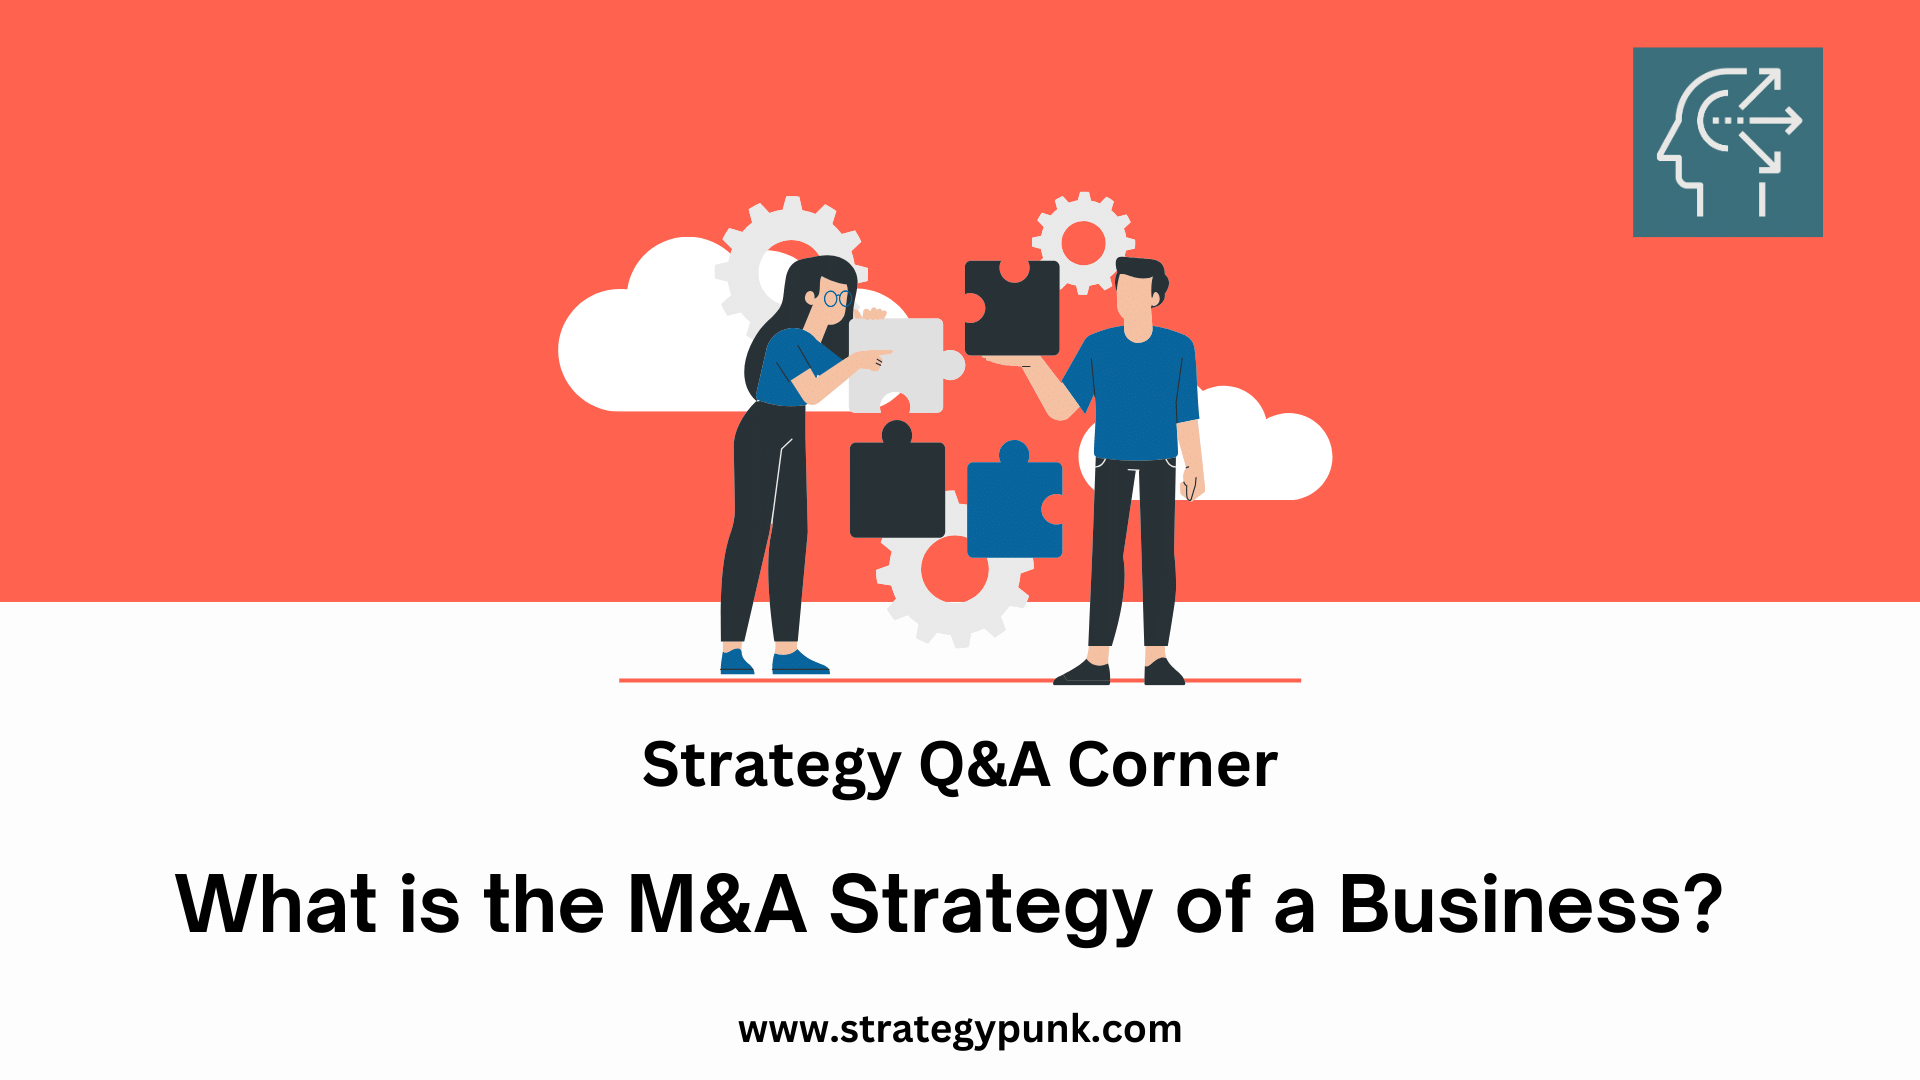 What is the M&A Strategy of a Business?